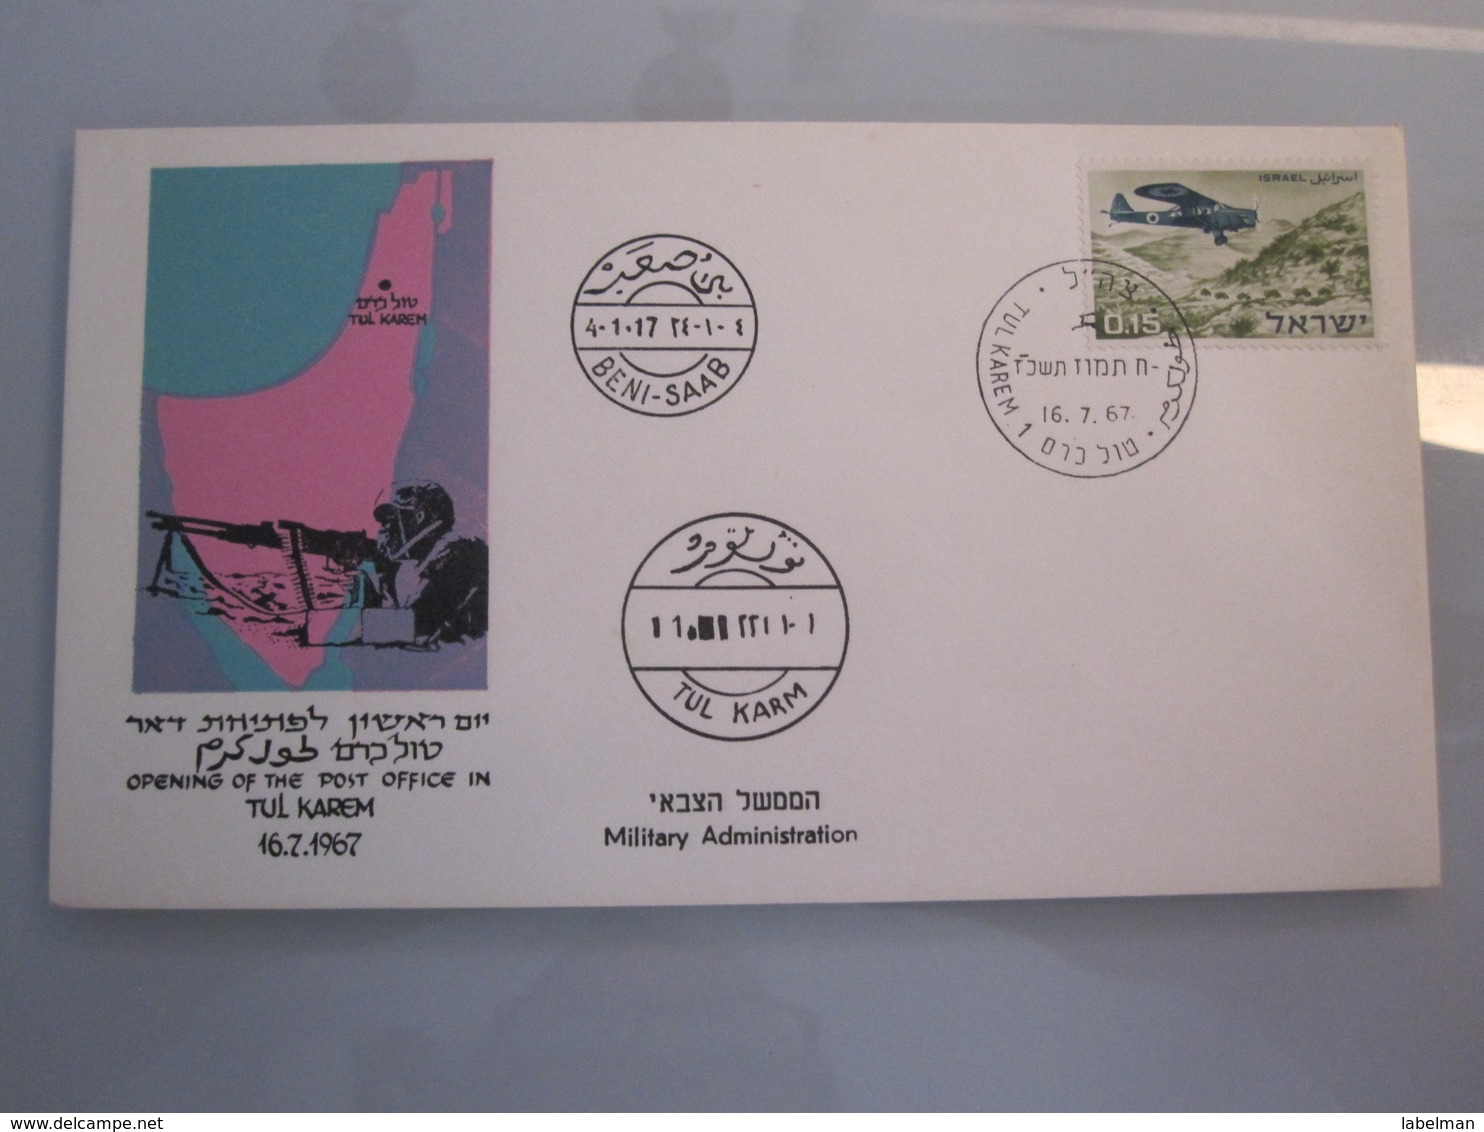 1967 POO FIRST DAY POST OFFICE OPENING MILITARY GOVERNMENT PALESTINE TUL KARM KAREM 6 DAYS WAR COVER ISRAEL CACHET - Covers & Documents